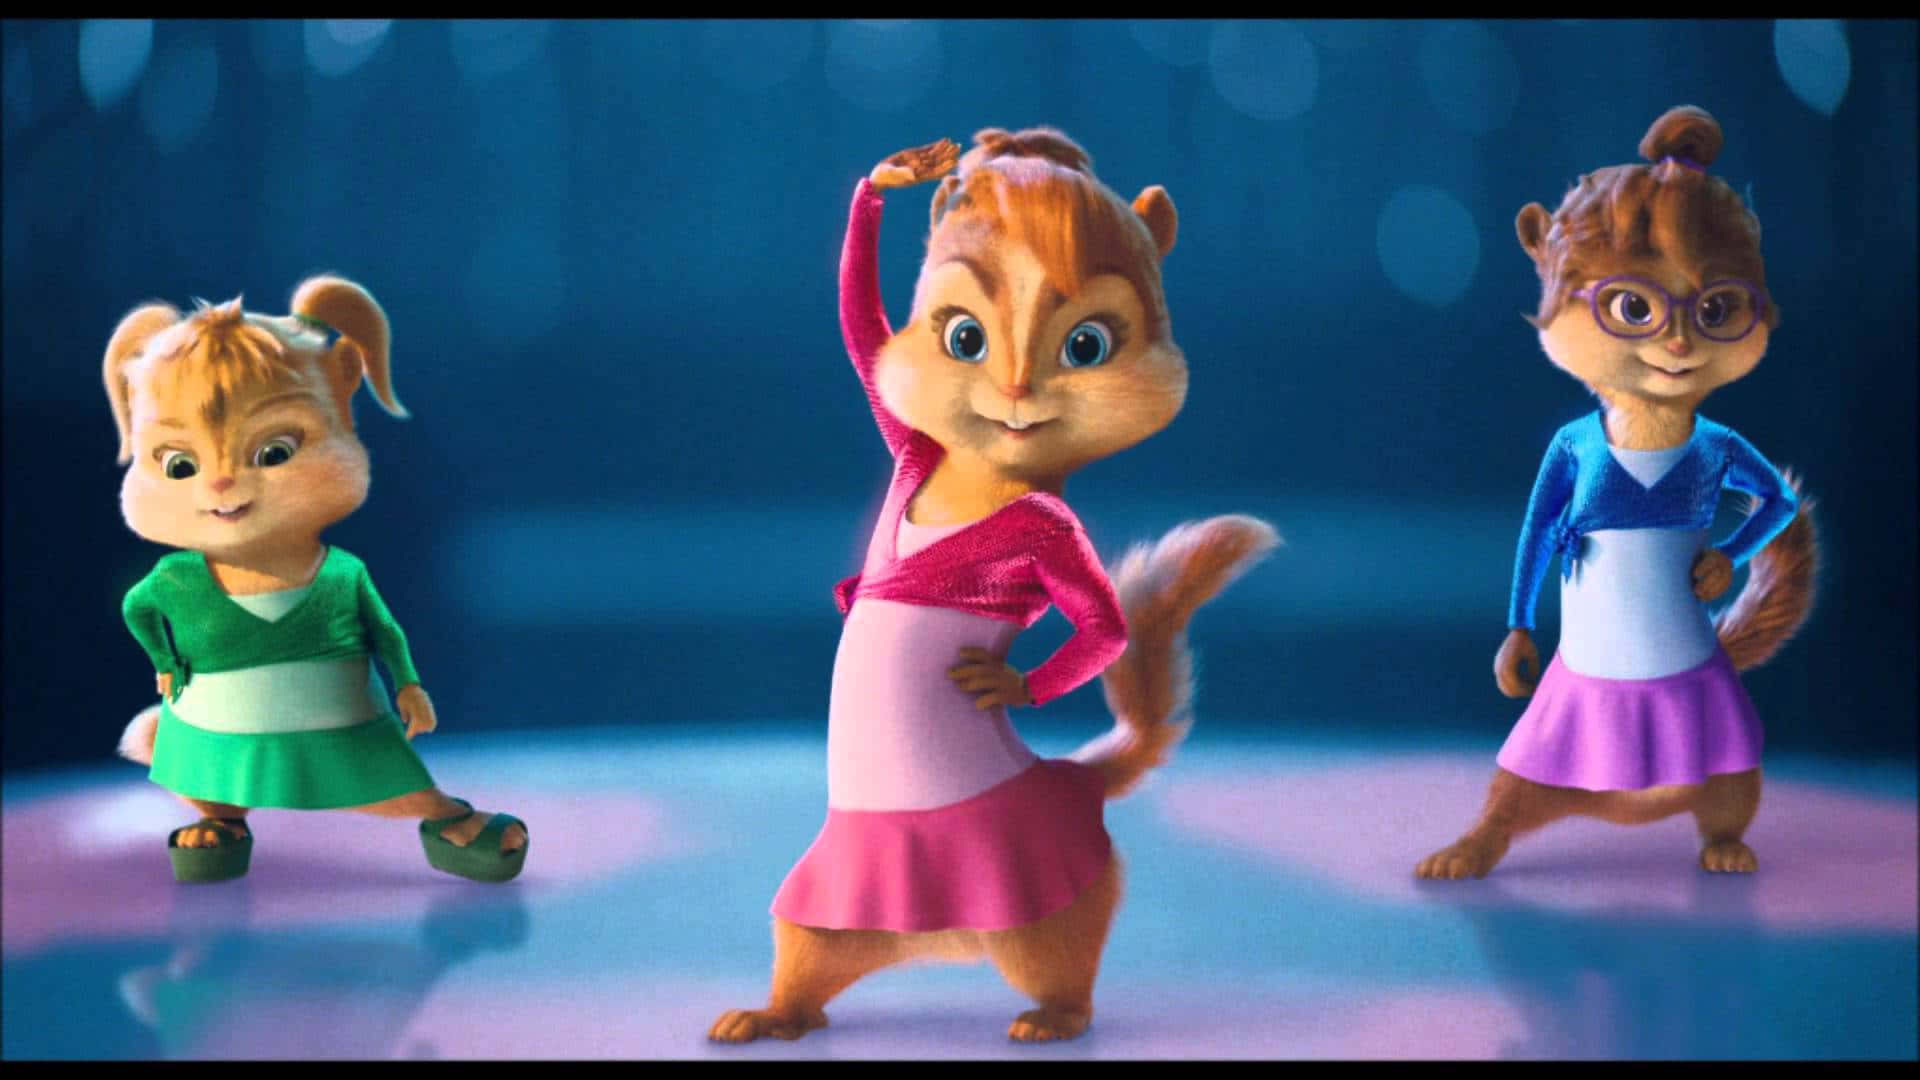 Join Alvin and the Chipmunks on a fun adventure.